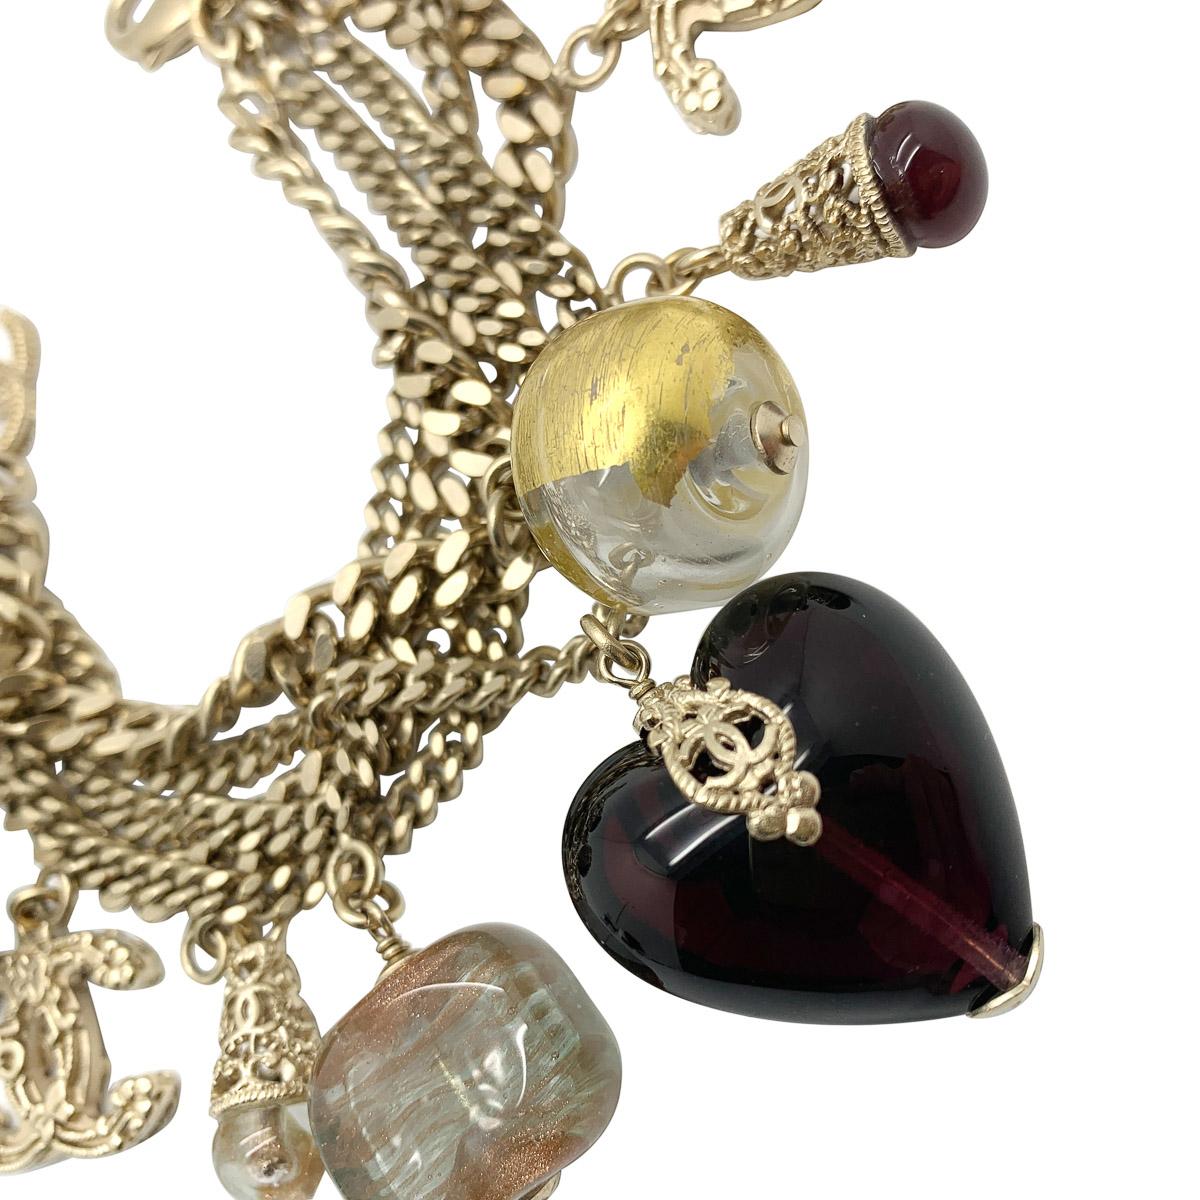 An exceptional Chanel Gripoix glass charm bracelet. Featuring an almost impossible display of charms. Amongst them logos, hearts, gripoix glass drops, balls set in filigree cages. The array of rich jewel colours against the antiqued gold metalwork